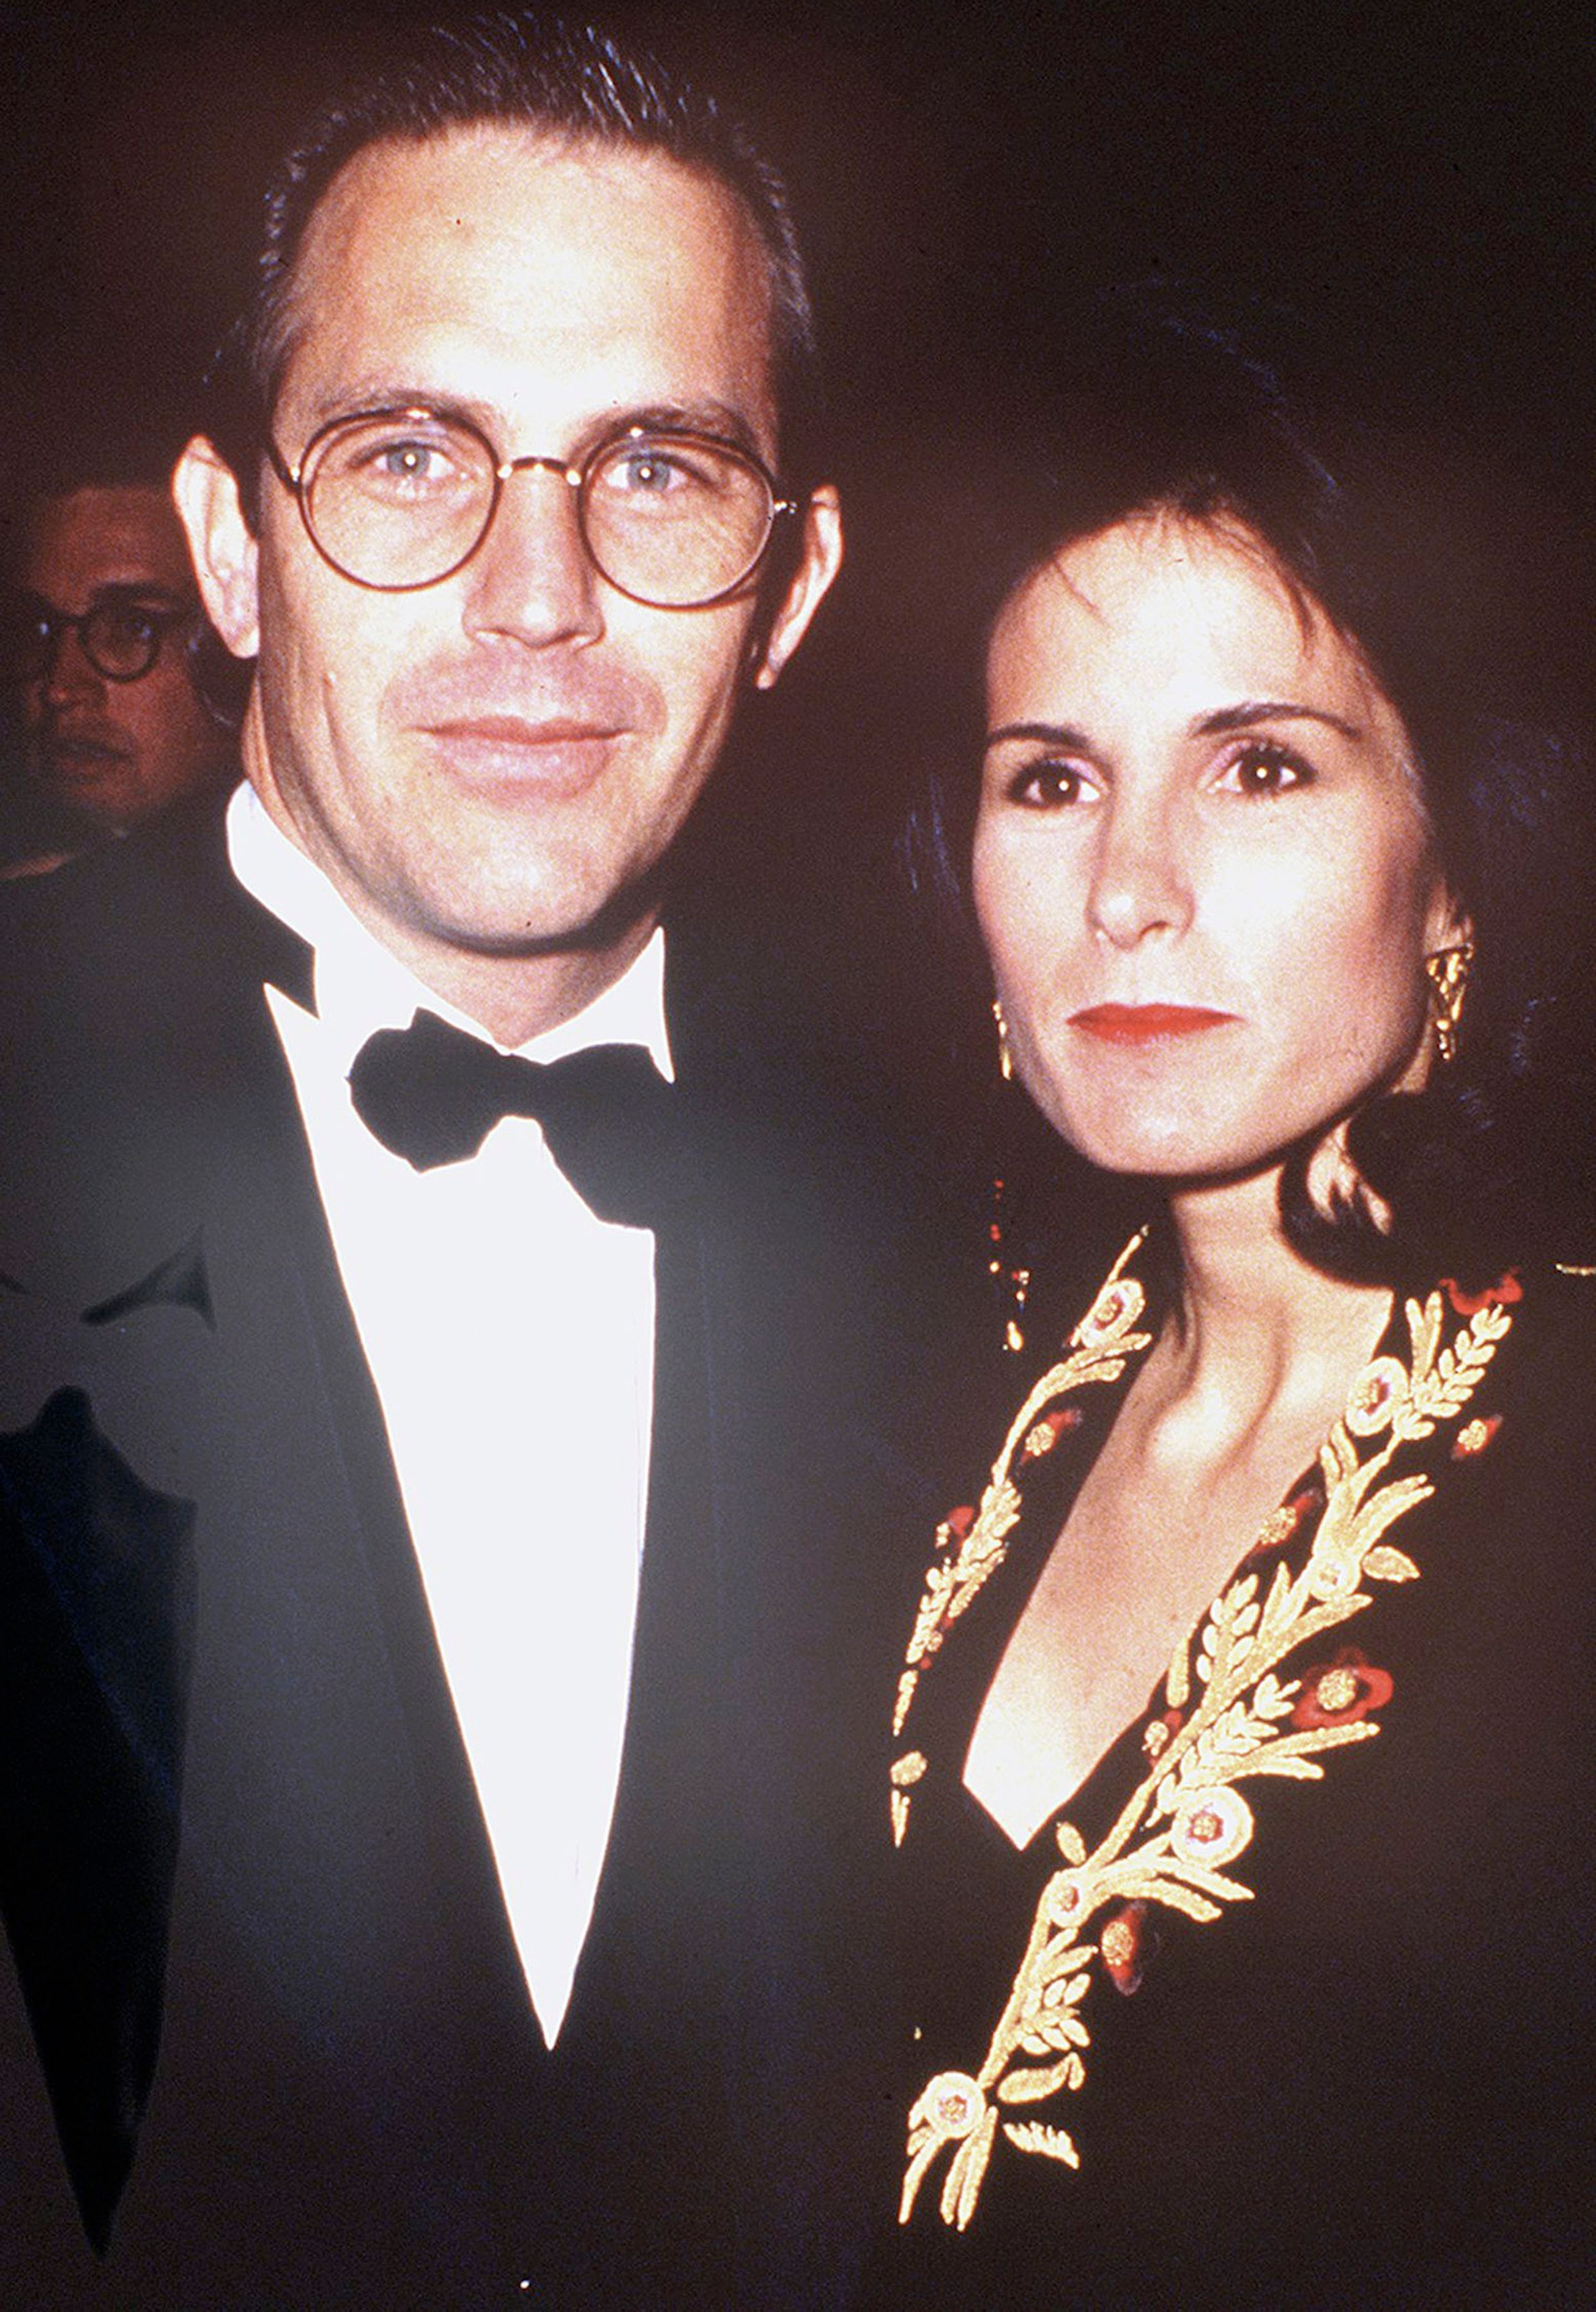 Cindy Costner and Kevin Costner at the 'Dances With Wolves' Los Angeles Premiere, November 1990. | Source: Getty Images